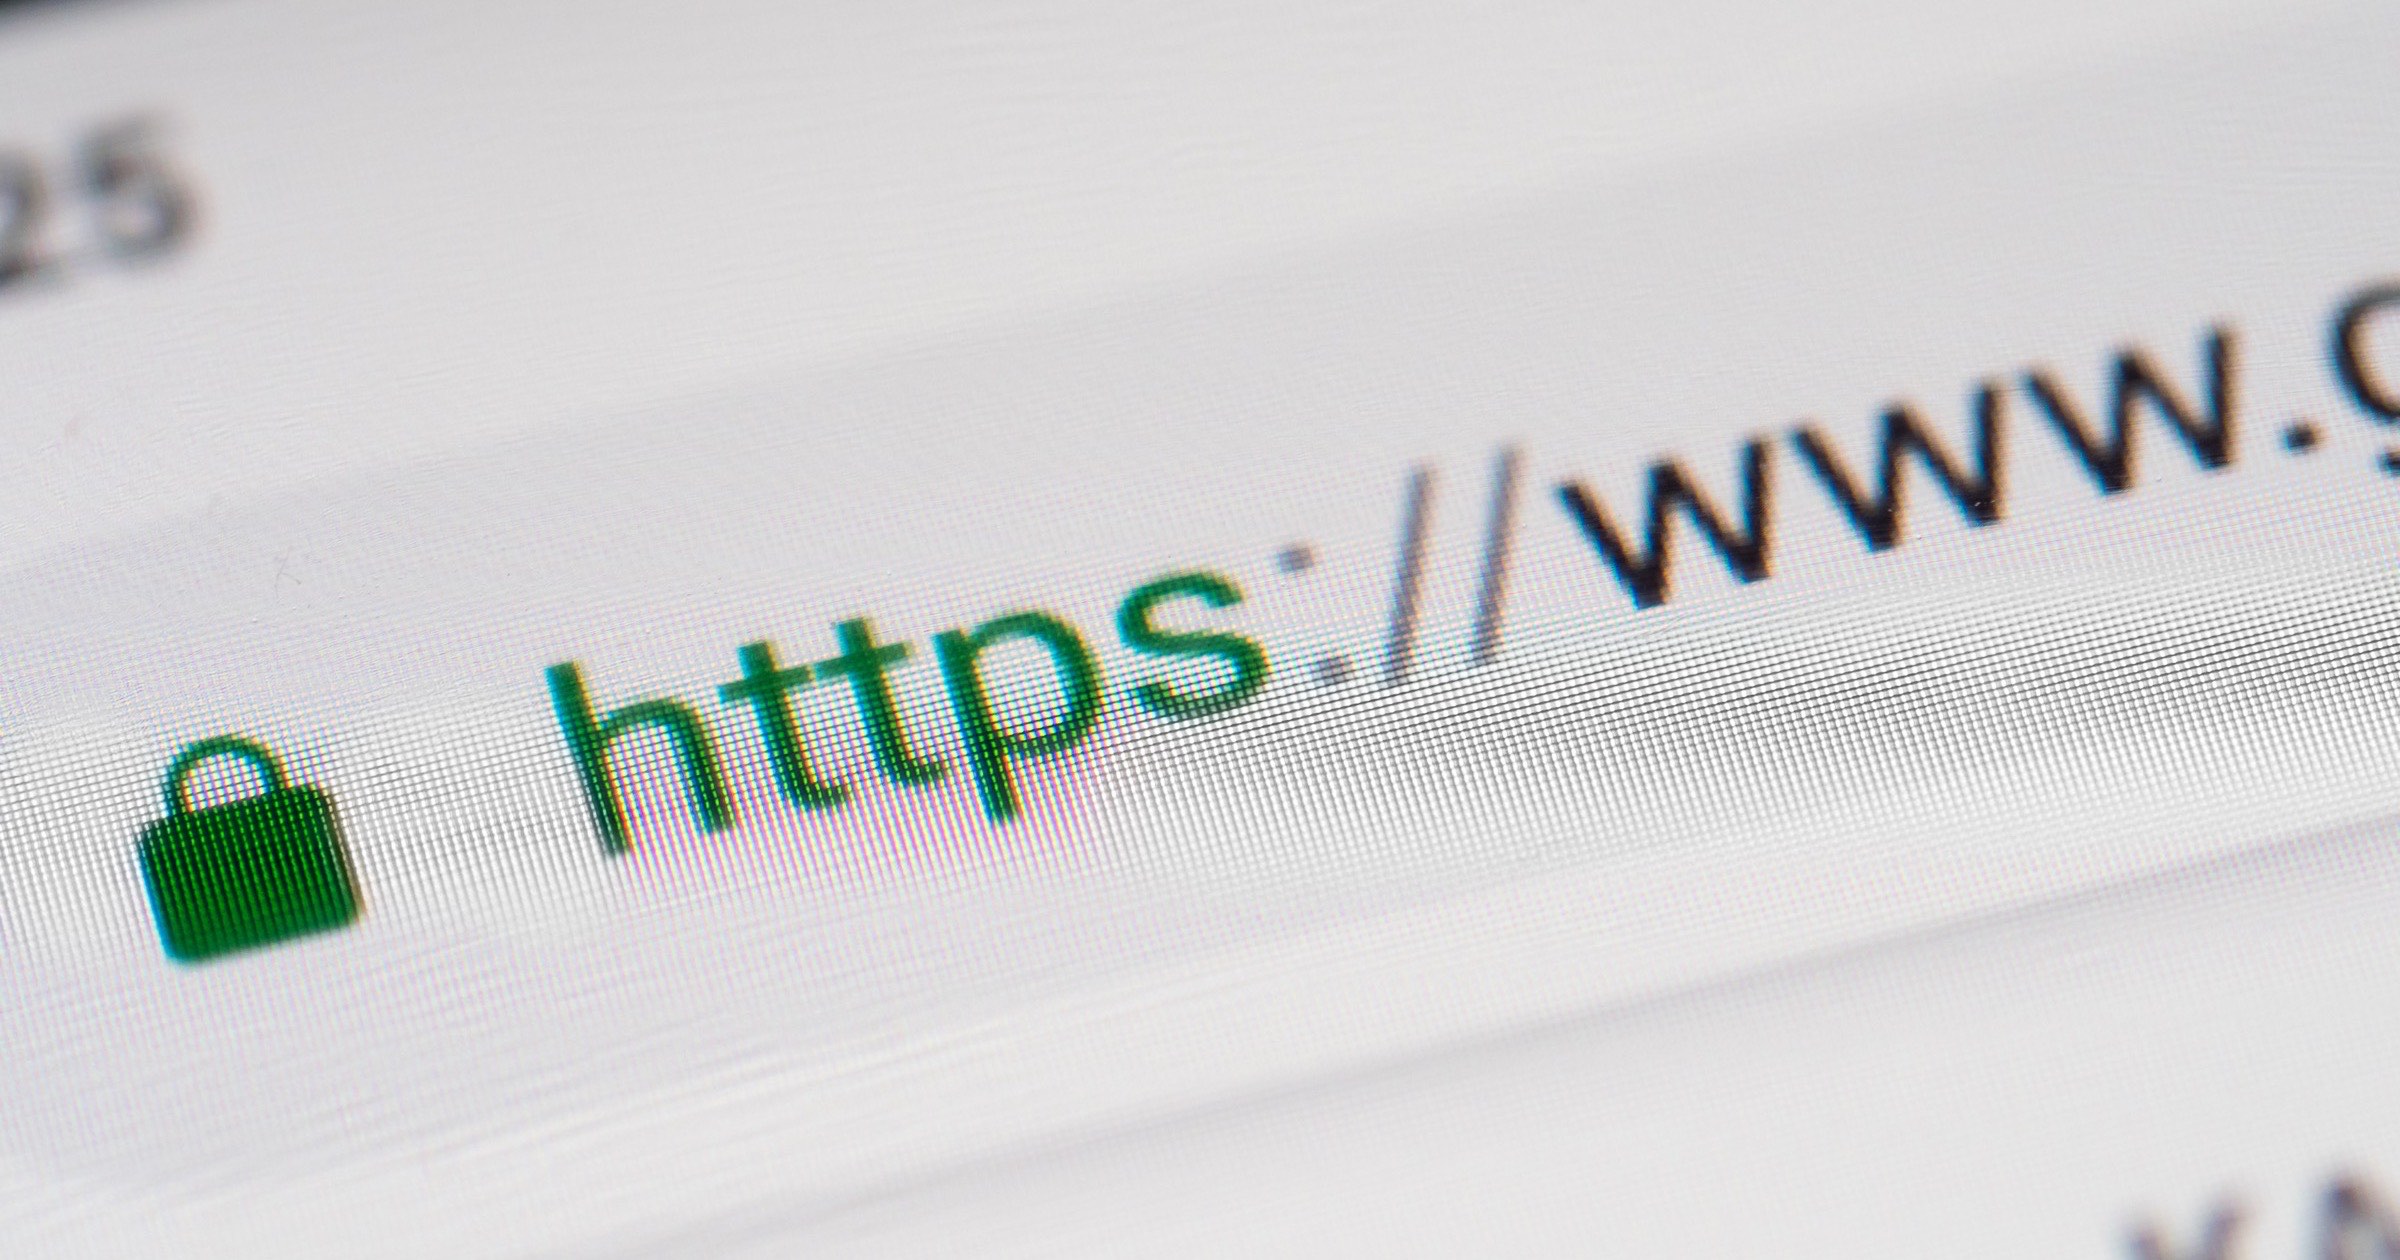 How Can You Tell if a URL is Safe to Click?